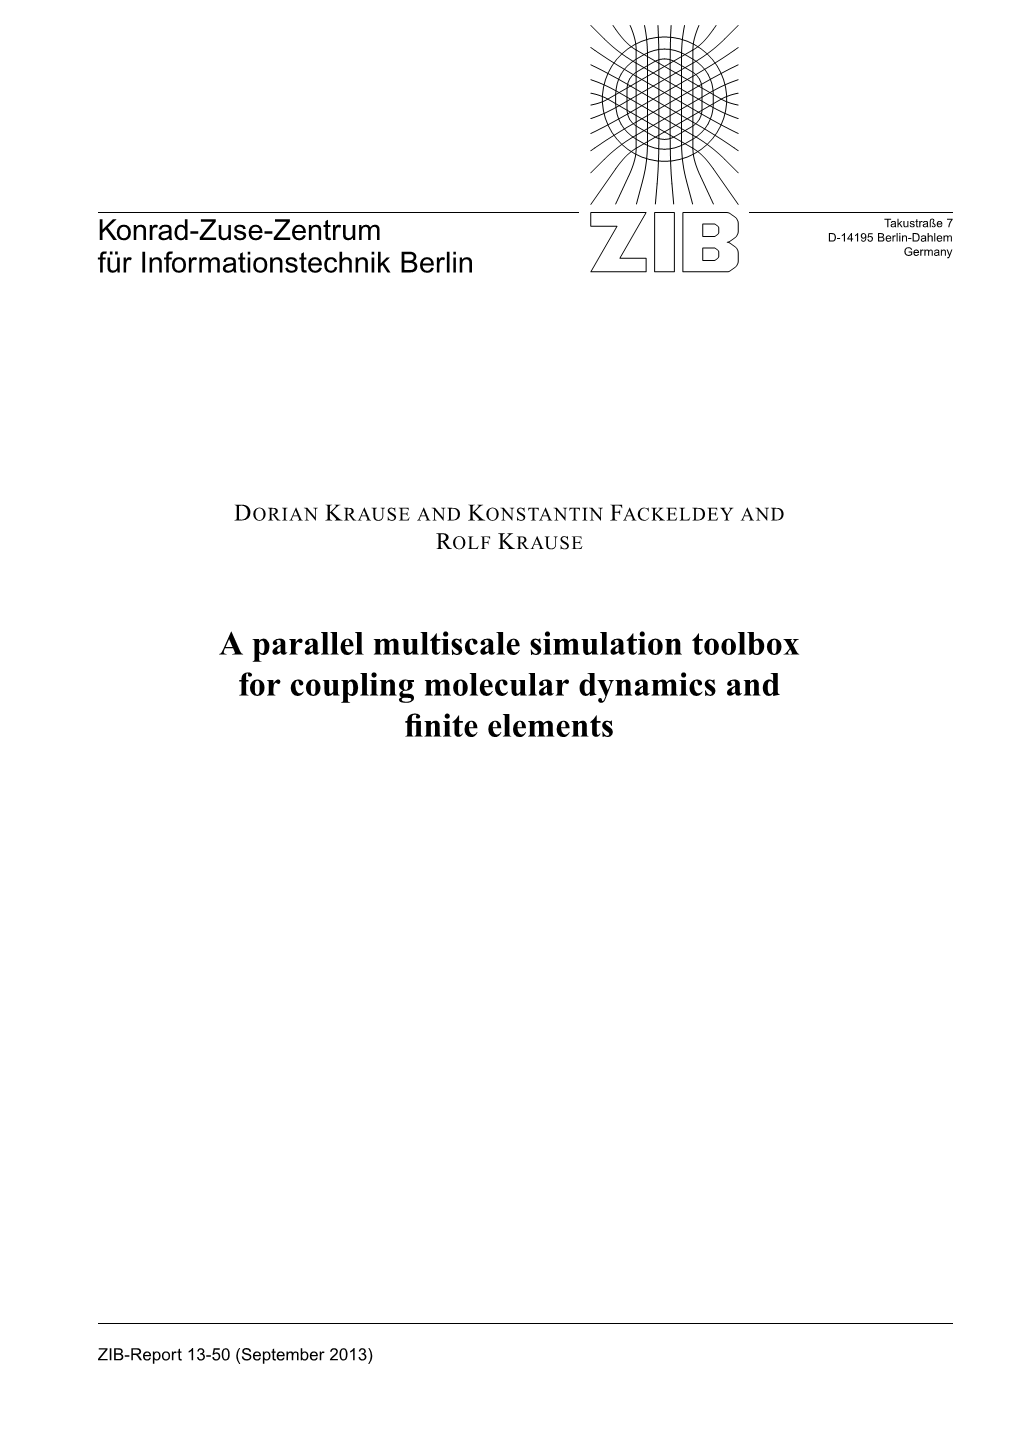 A Parallel Multiscale Simulation Toolbox for Coupling Molecular Dynamics and ﬁnite Elements